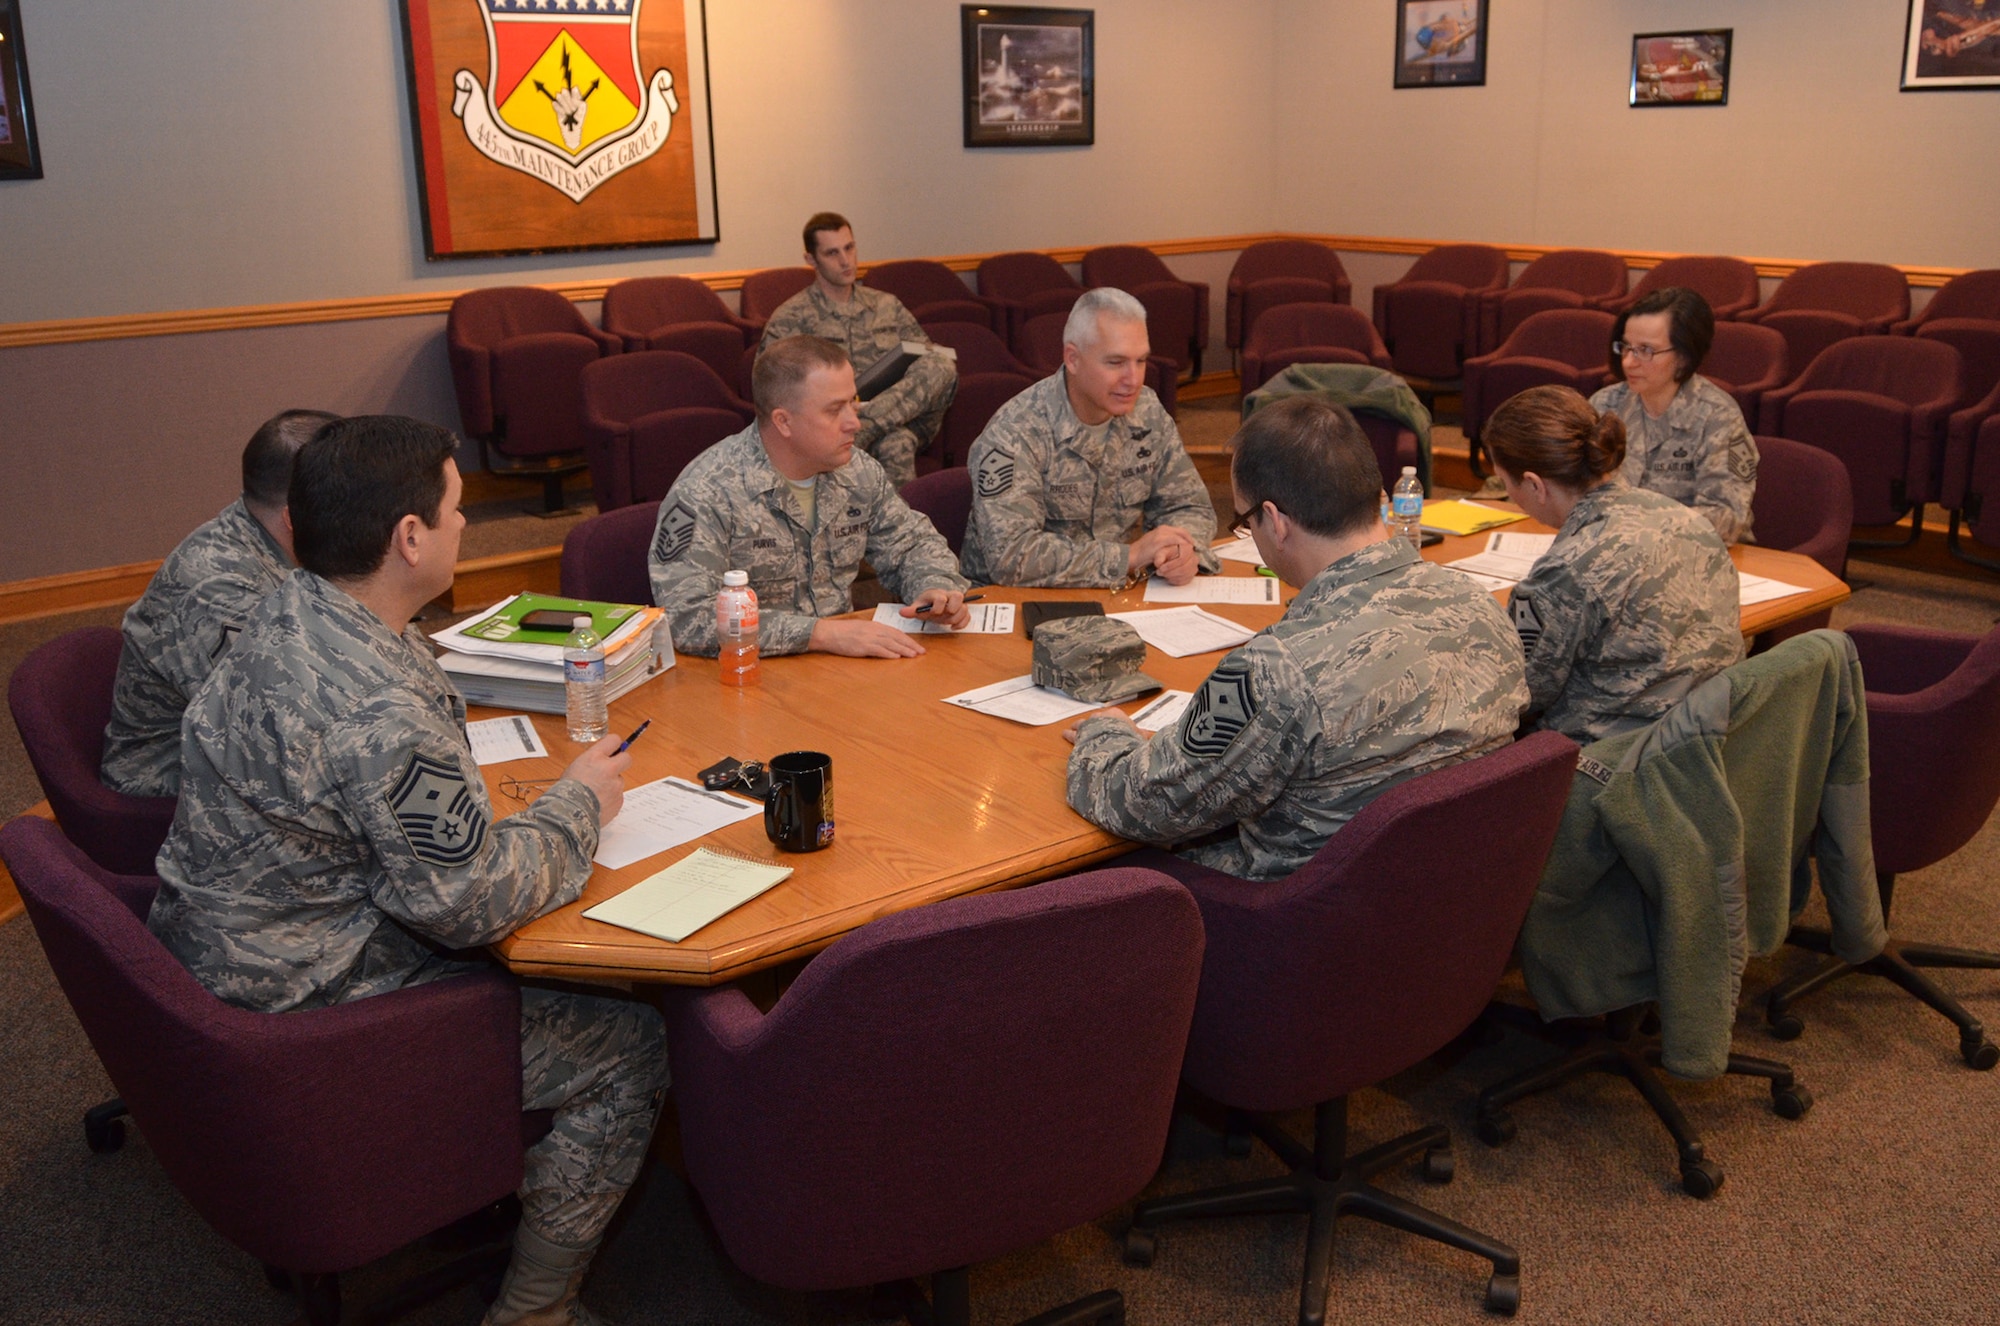 WRIGHT-PATTERSON AIR FORCE BASE, Ohio - The 445th First Sergeants Council discuss current personnel issues during the Feb. 8 unit training assembly. (U.S. Air Force photo/Senior Airman Matthew Cook)